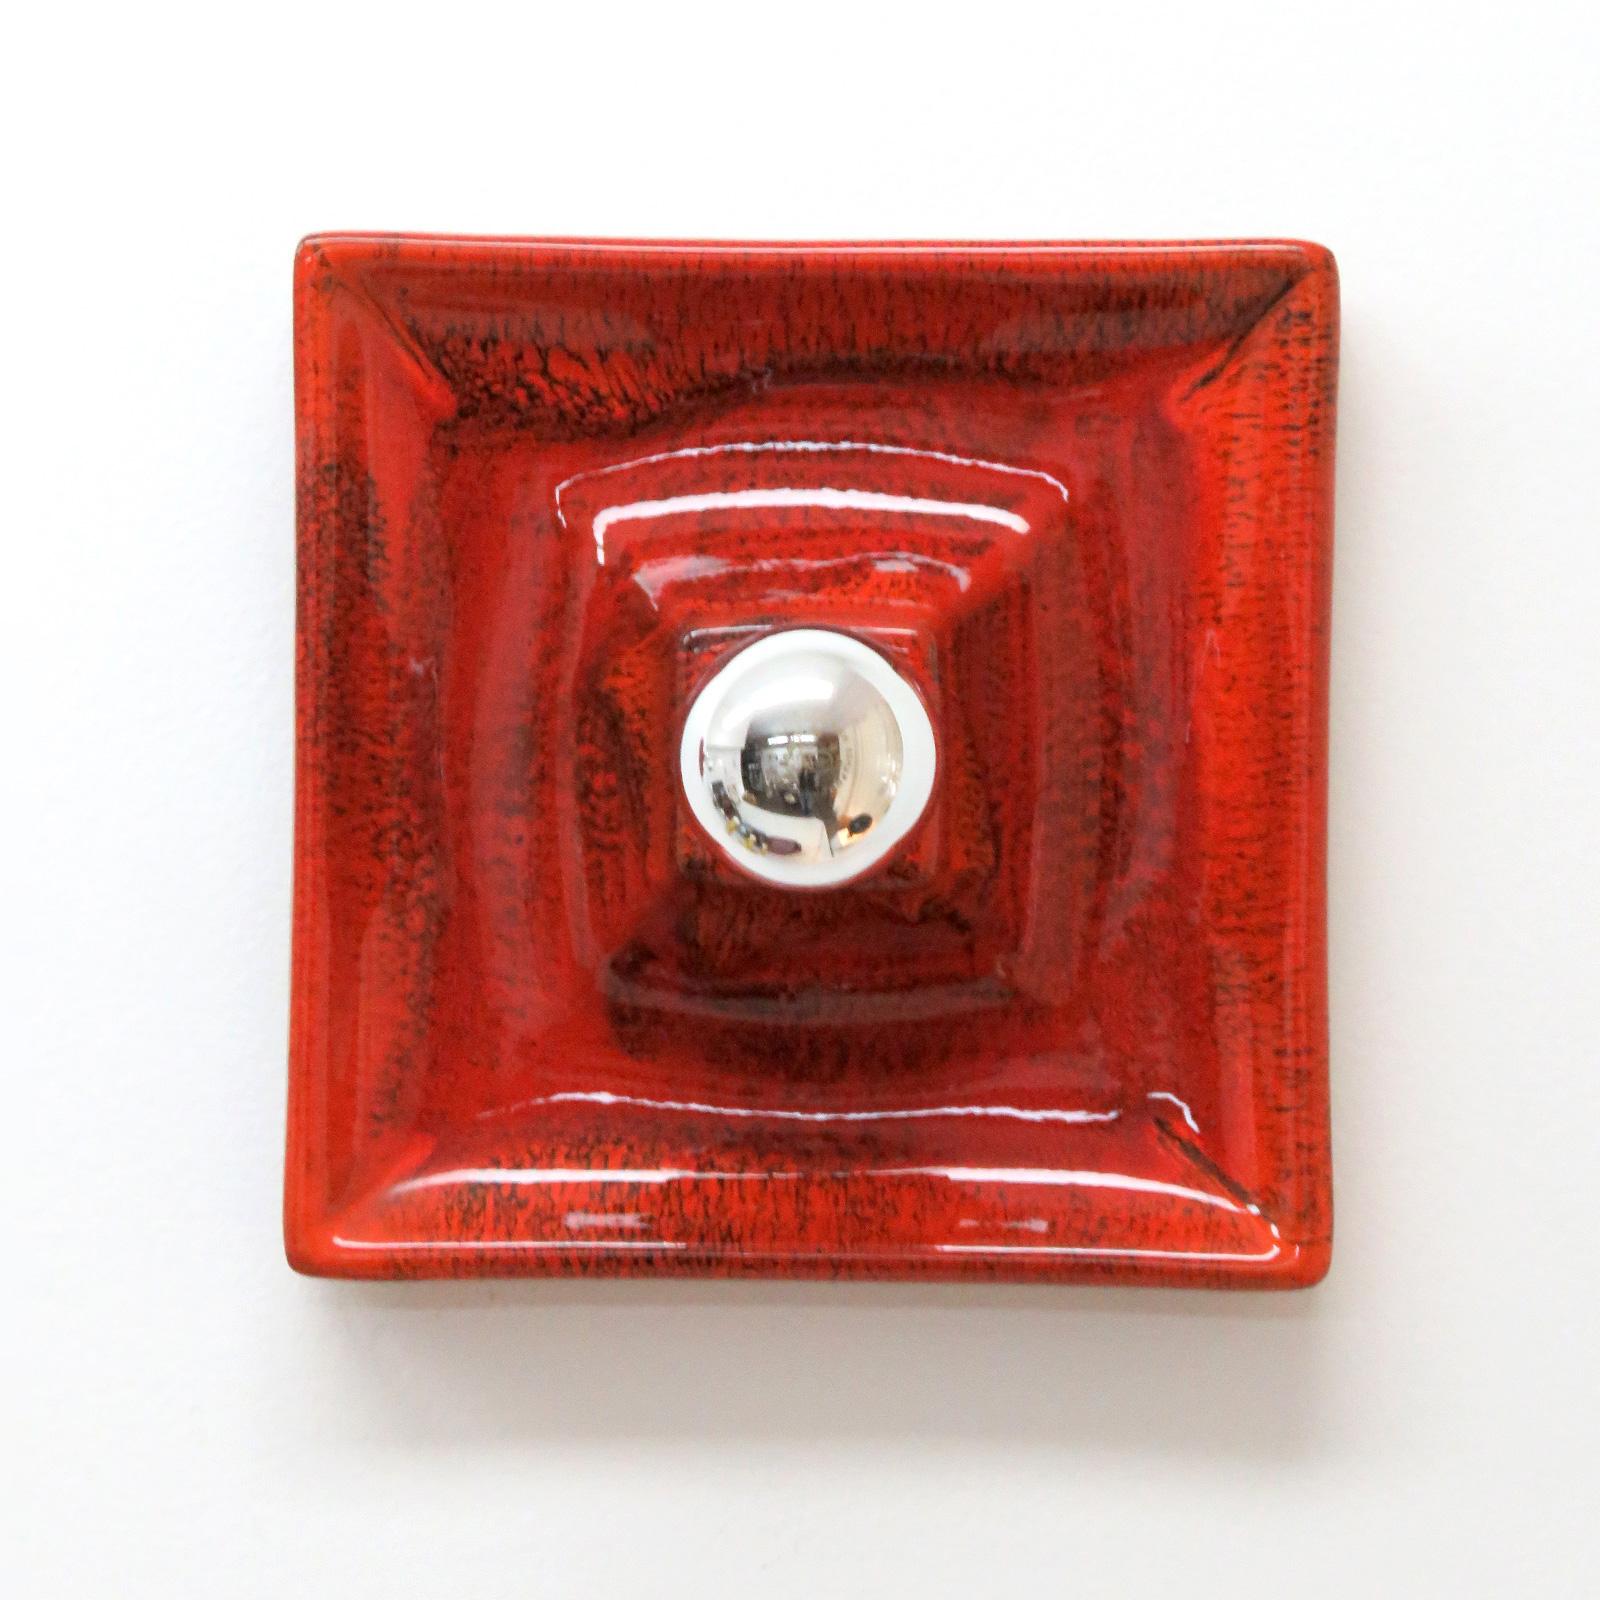 Wonderful red ceramics wall lights by Kaiser Leuchten, Germany, one E26 socket per fixture, max. wattage 75w each or LED equivalent, wired for US standards or European standards (110v/220v), UL listing available upon request for an additional